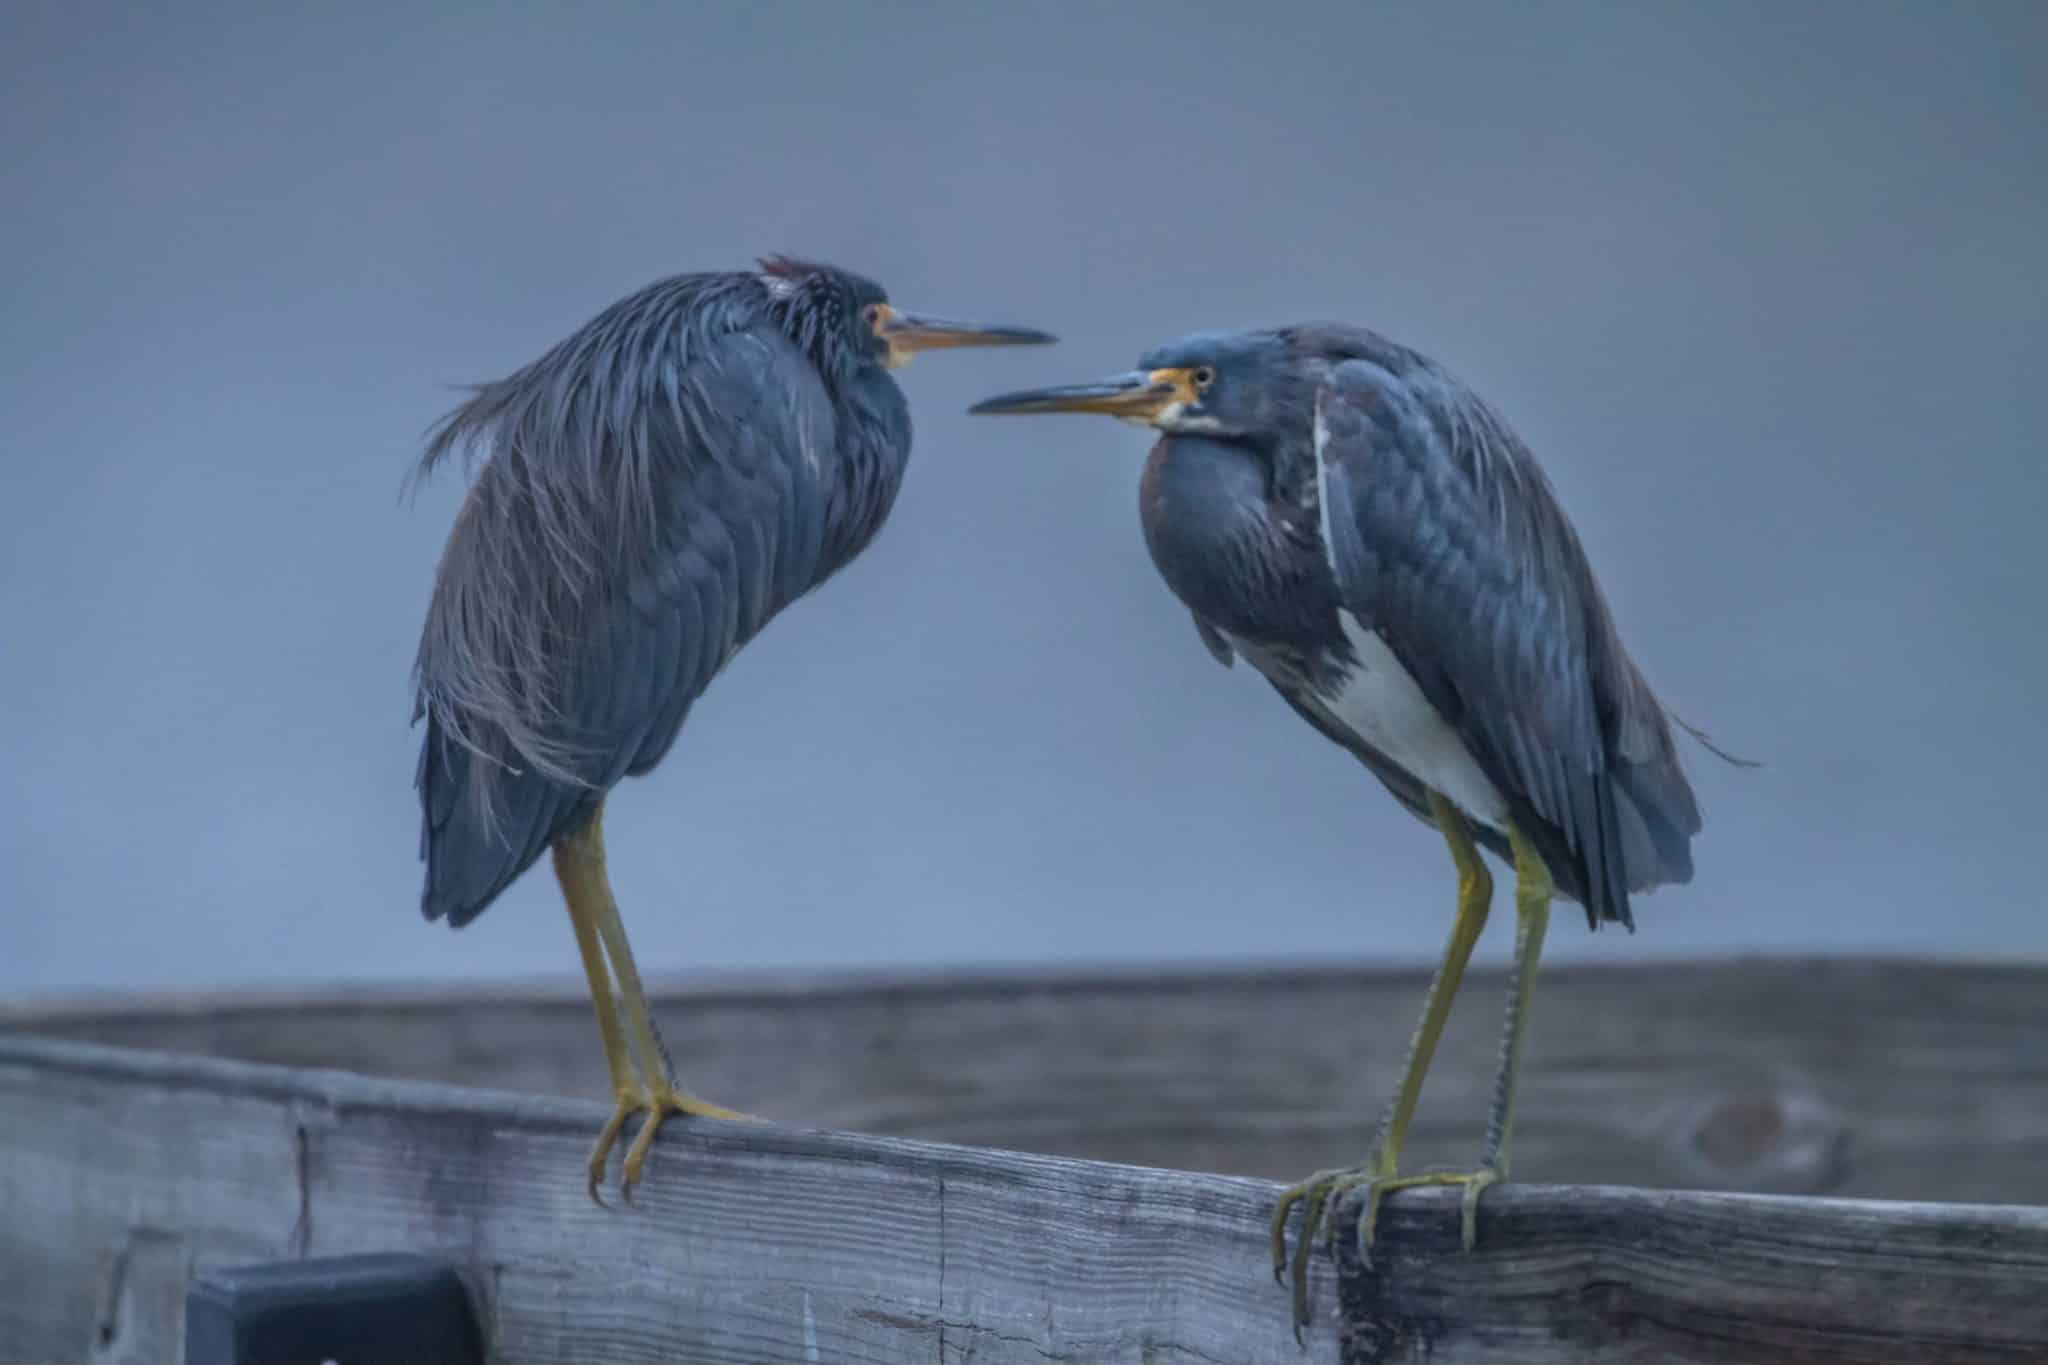 Two blue herons sitting on a wooden structure.